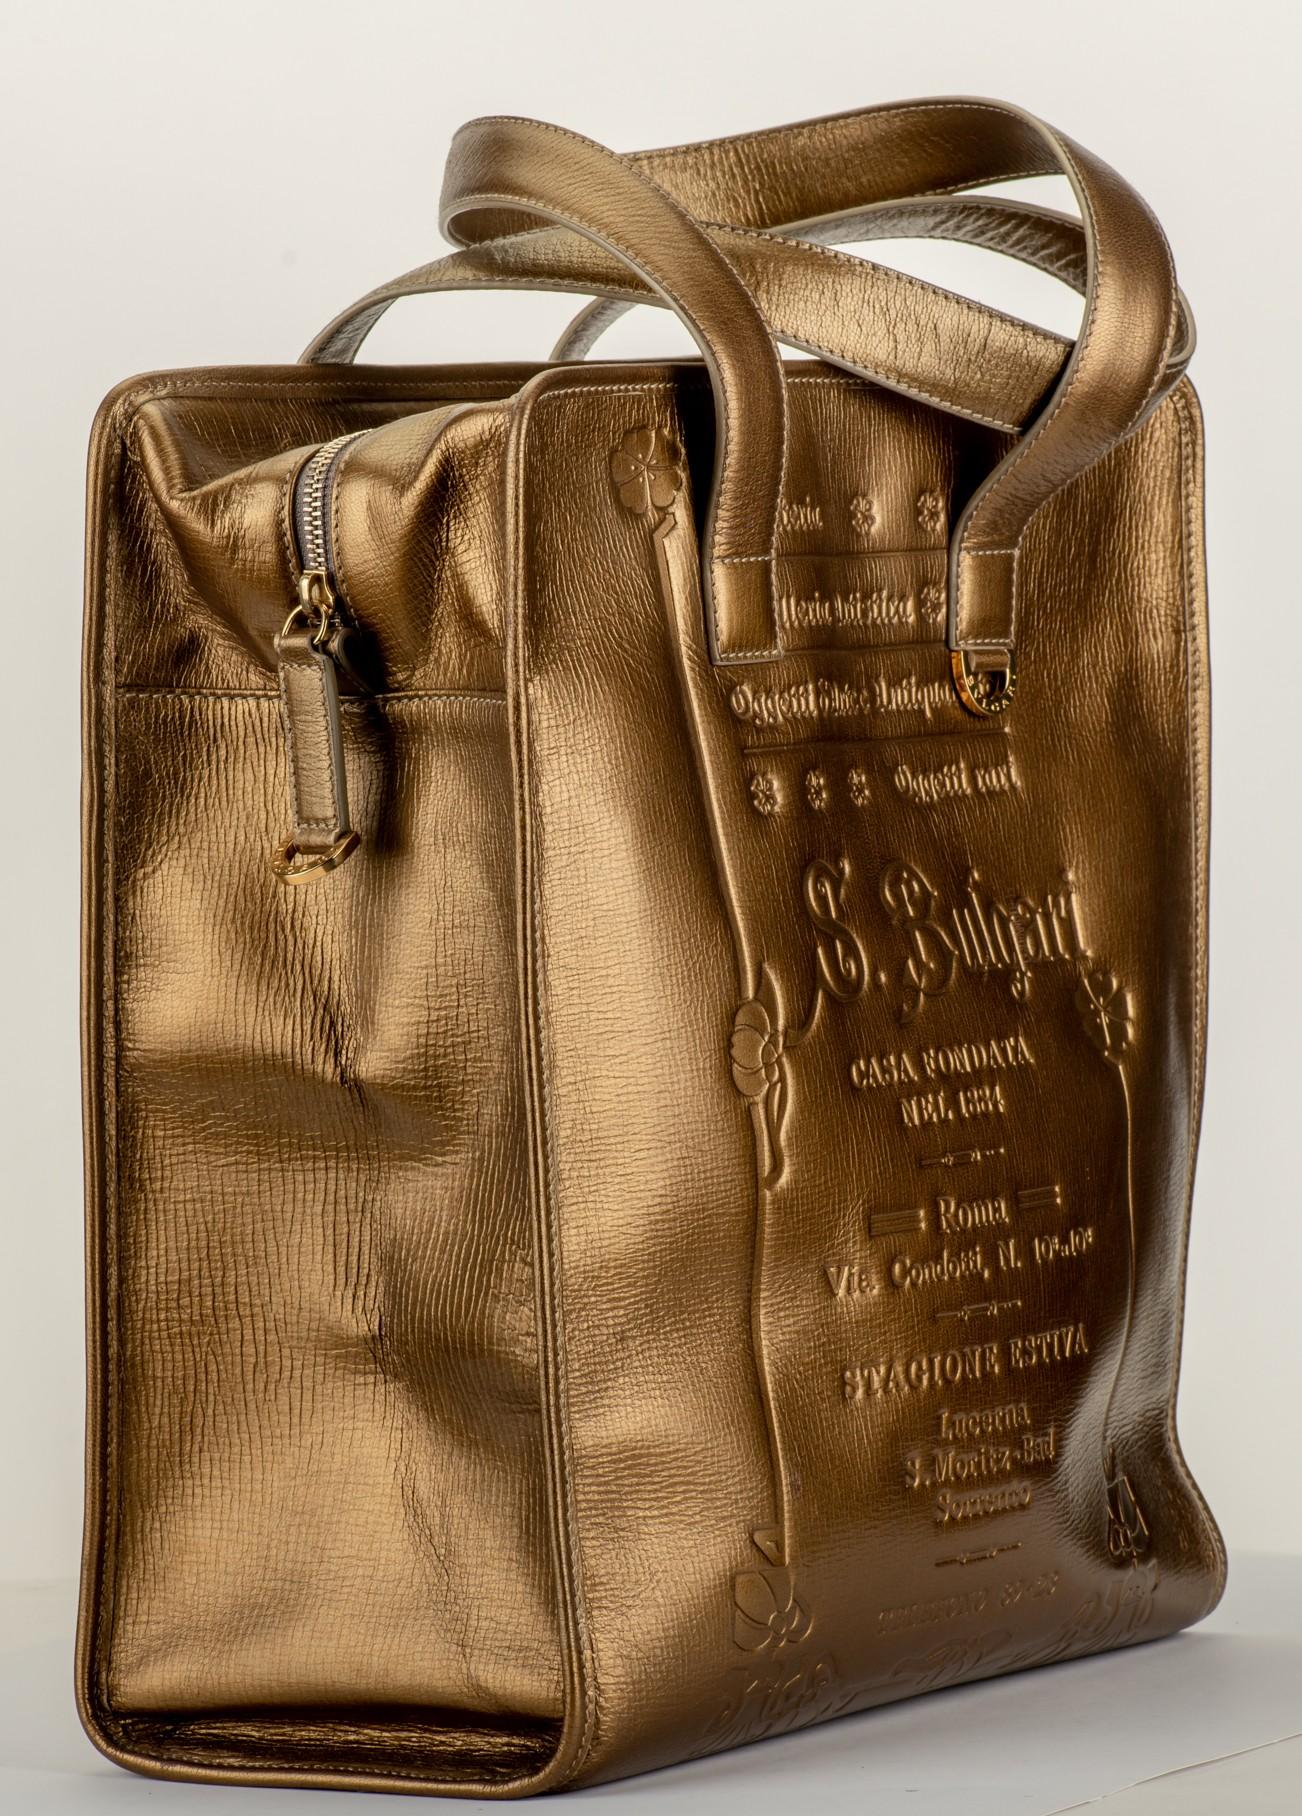 Bulgari mint condition large bronze leather shopper with gold tone hardware. Comes with booklet and original dust cover.